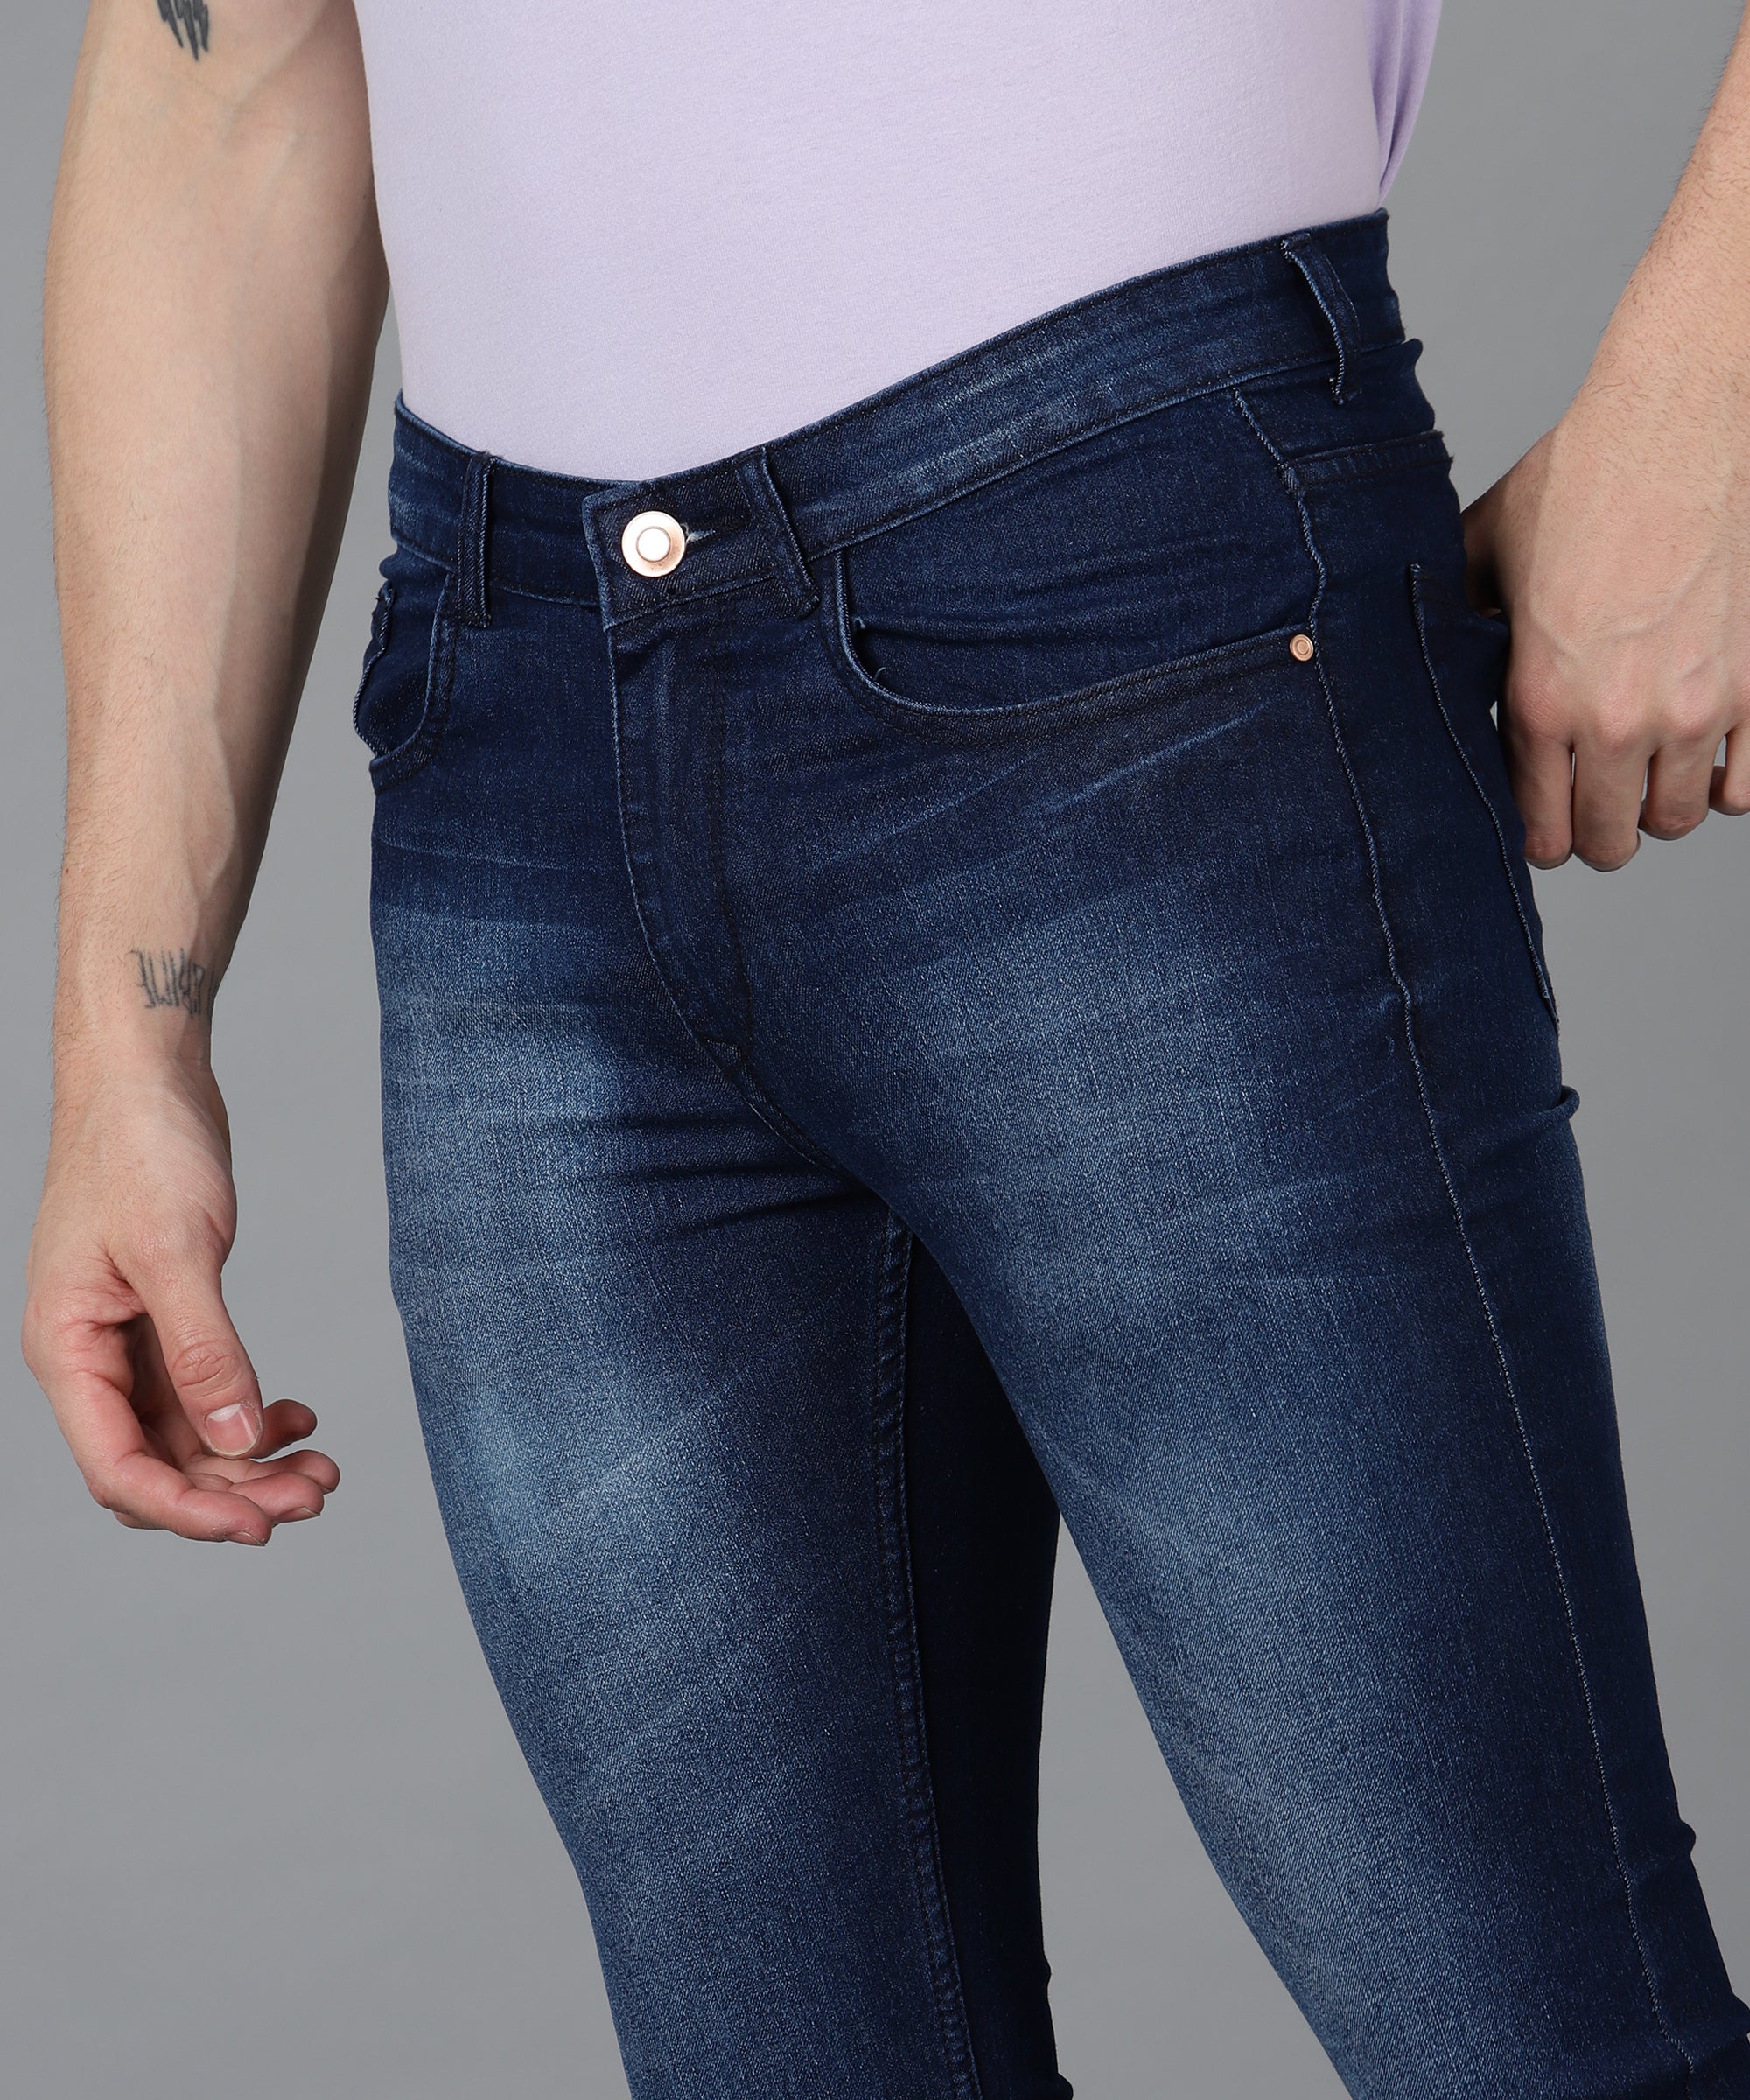 Men's Navy Slim Fit Washed Jeans Stretchable